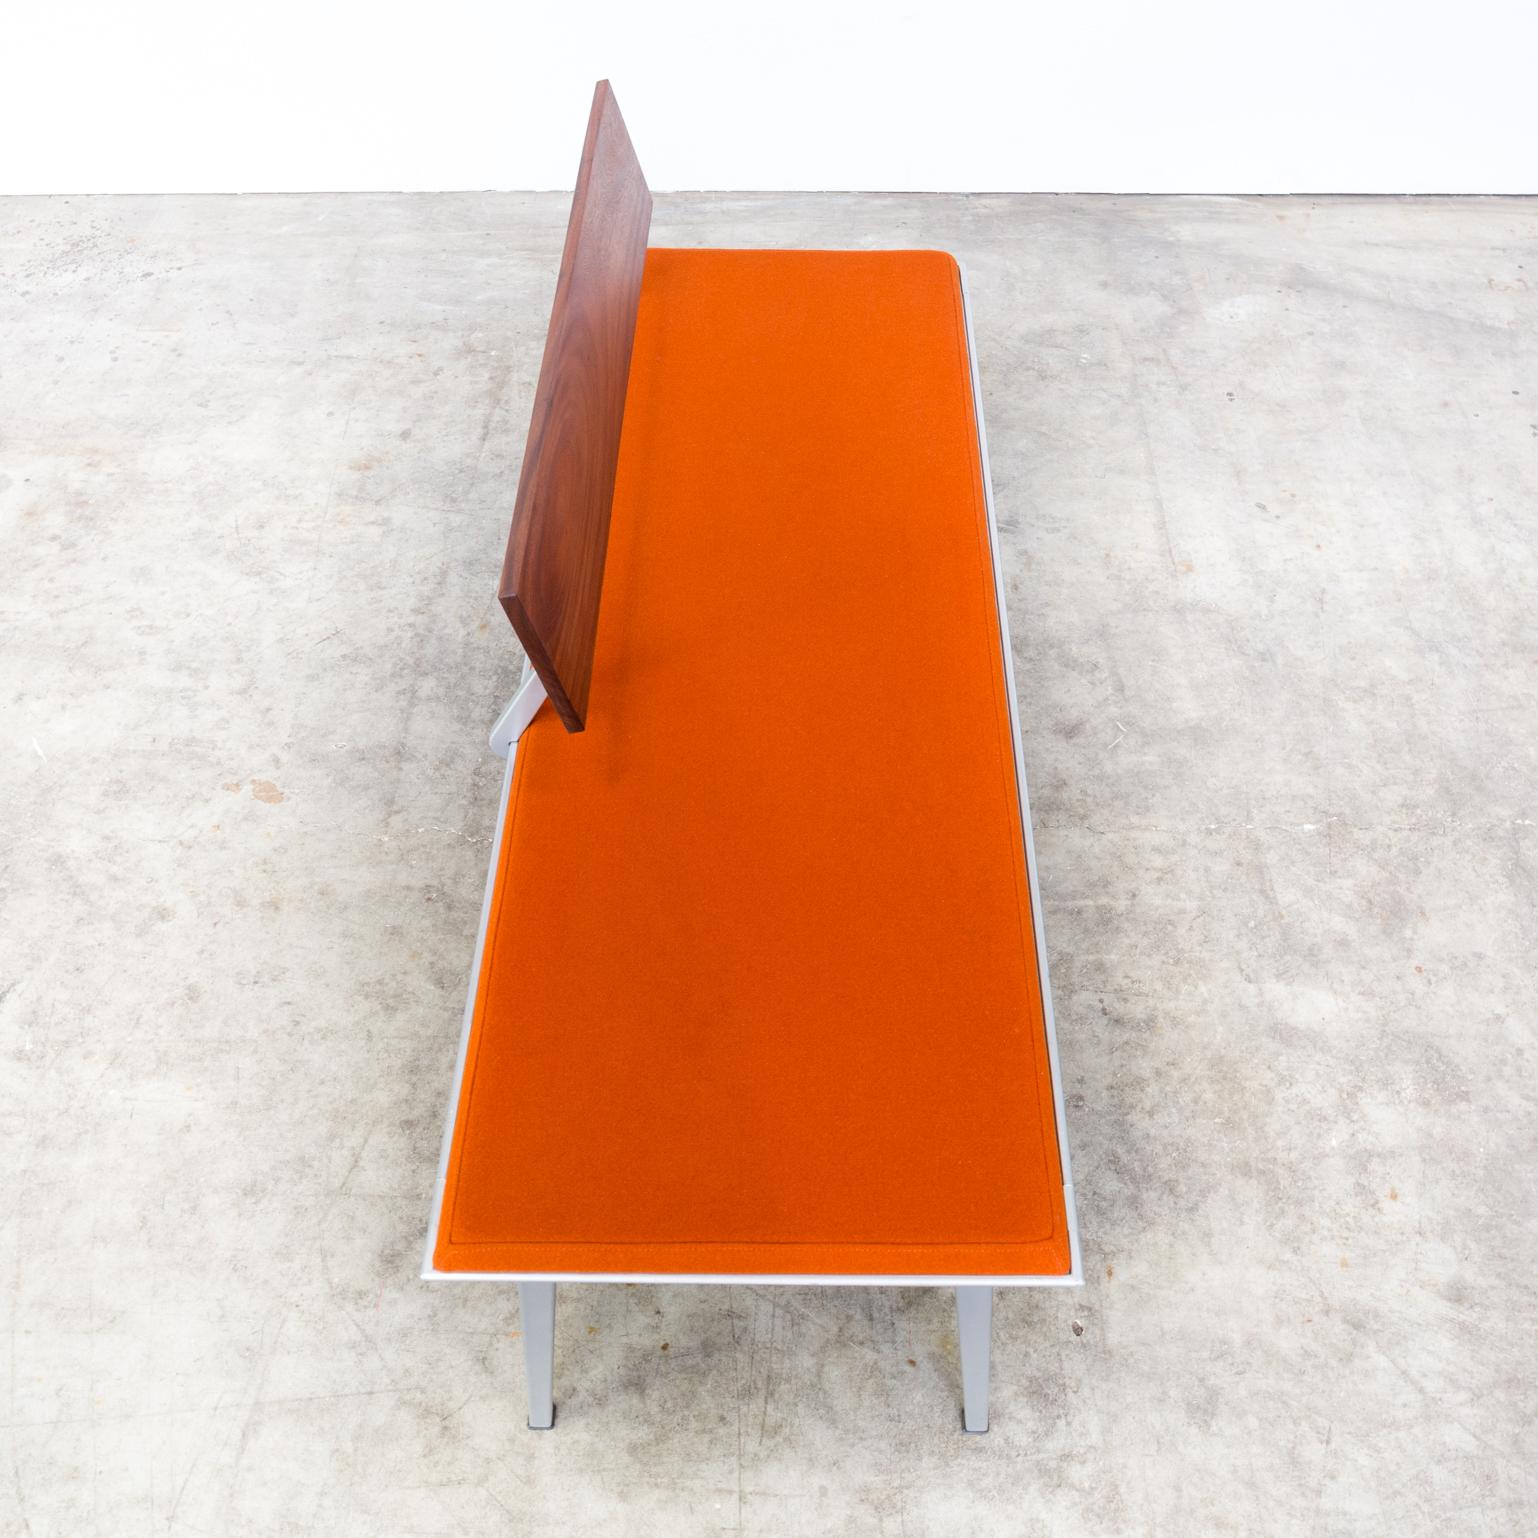 1990s Bas Pruyser ‘Ahrend 600’ Museum Bench for Ahrend de Cirkel For Sale 5